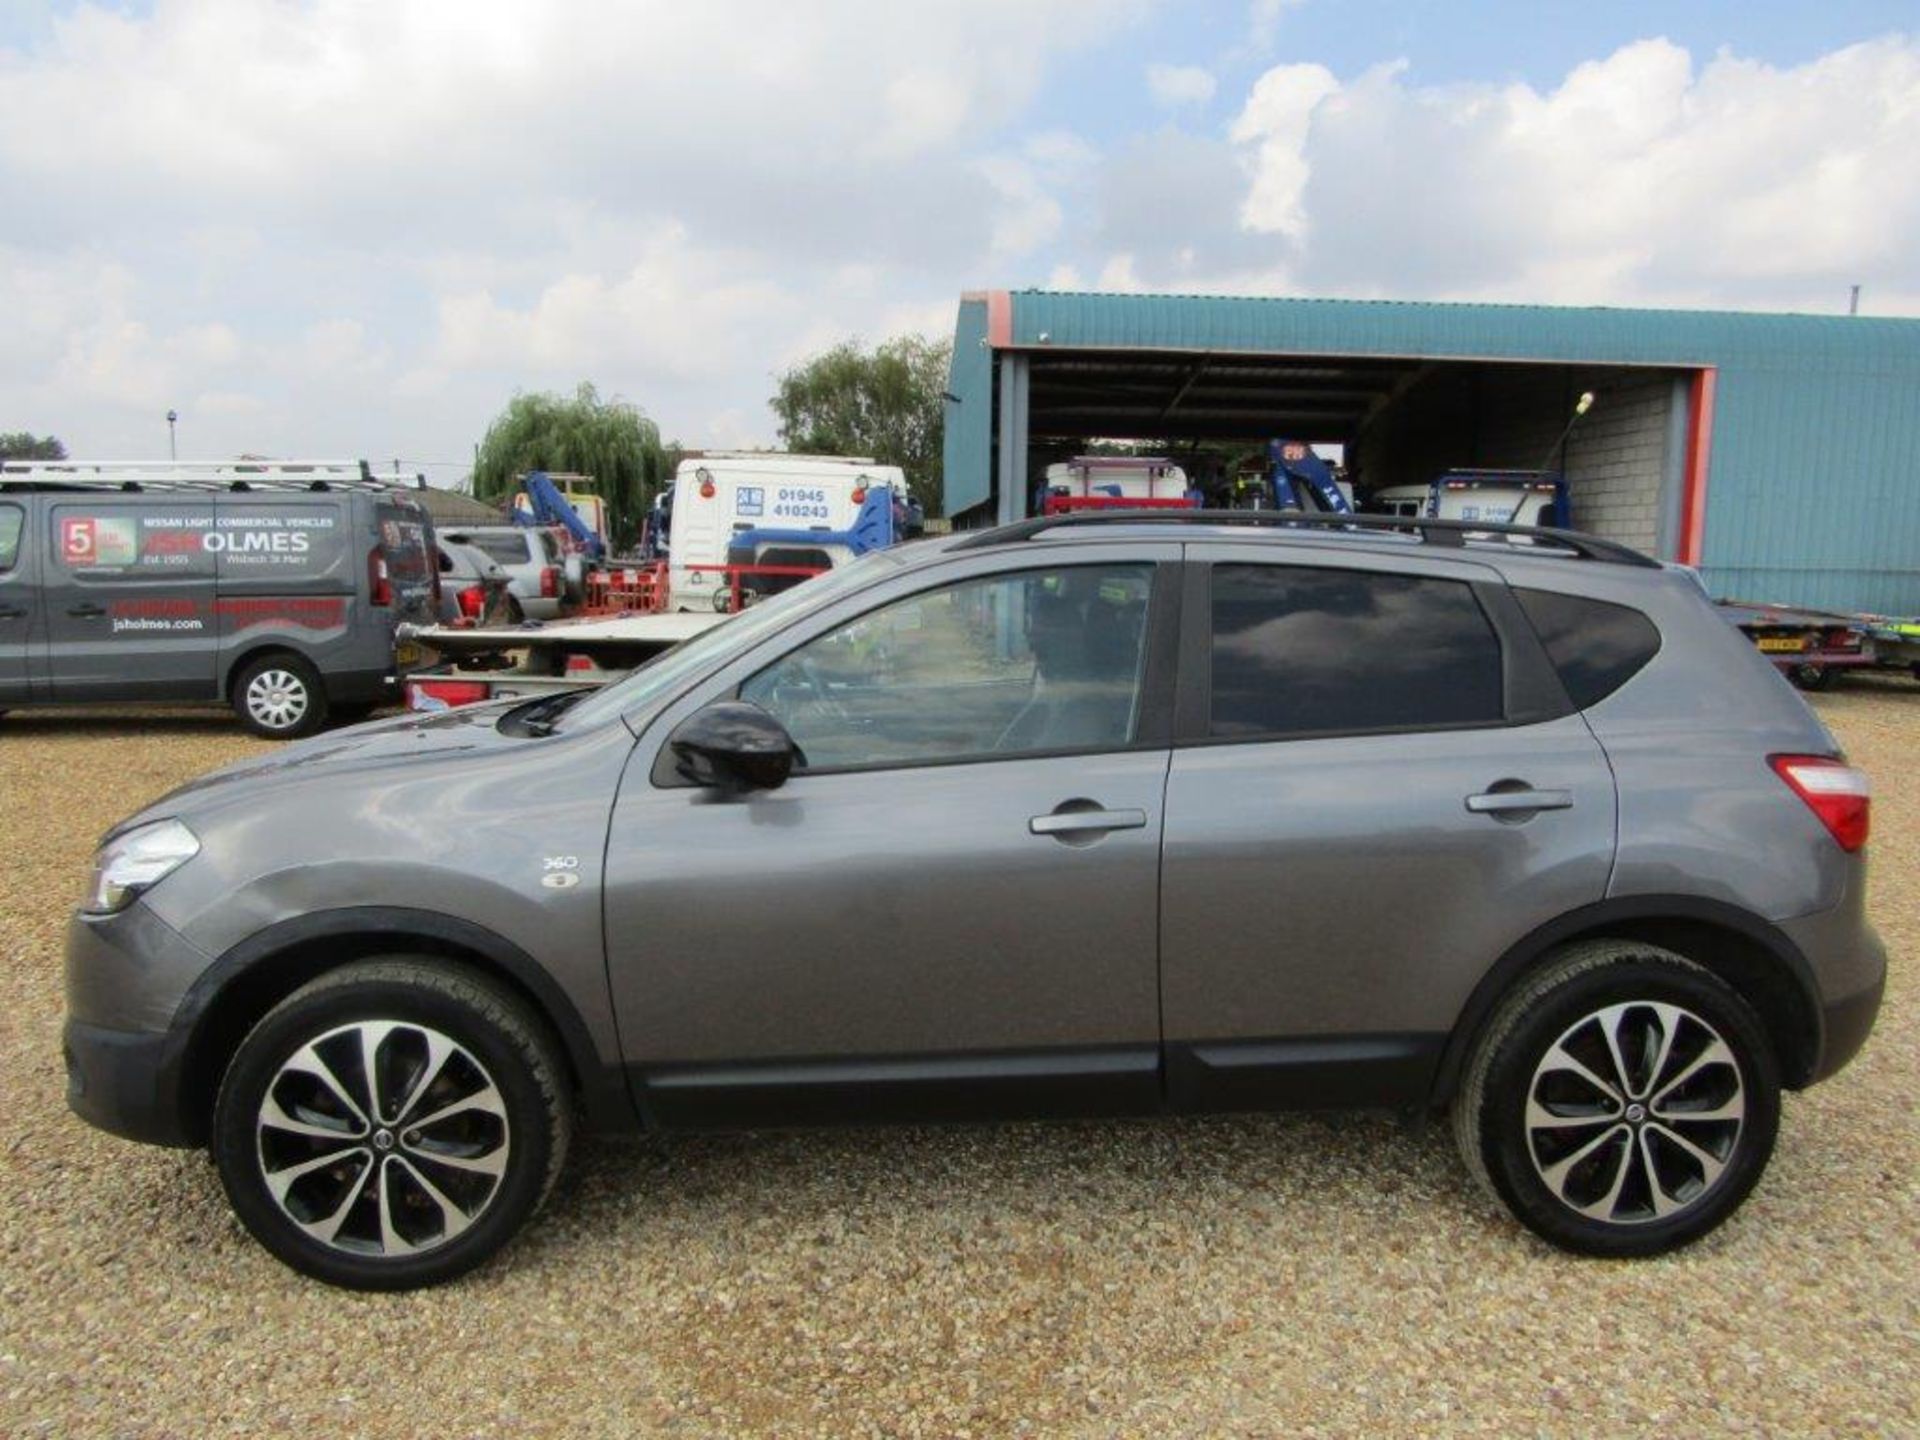 13 13 Nissan Qashqai 360 iS DCi - Image 2 of 27